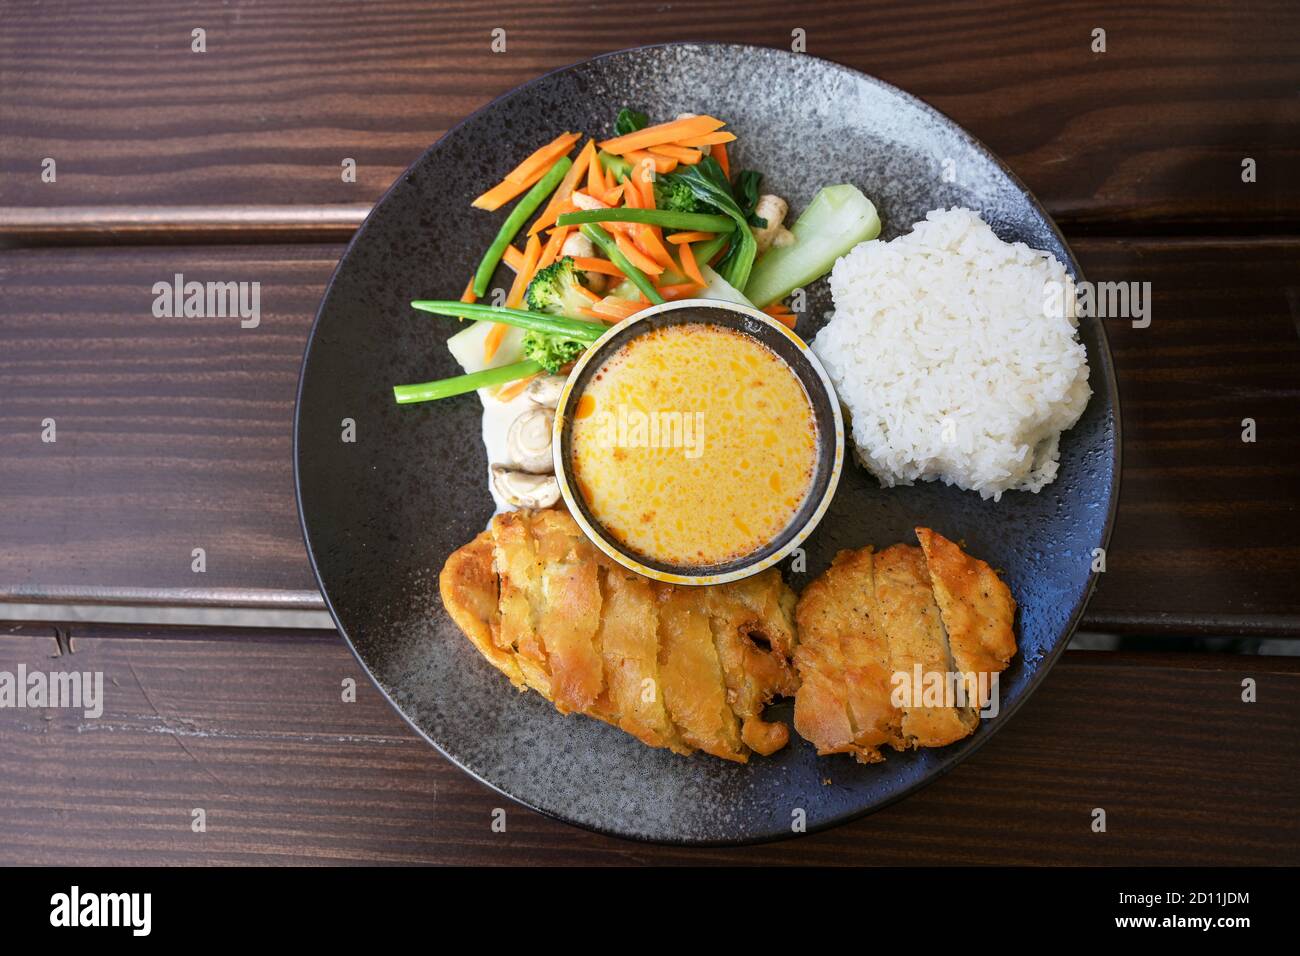 Asian dish with fried chicken, vegetables, steamed rice and coconut curry sauce on dark gray plate with chopsticks on a wooden table, high angle view Stock Photo